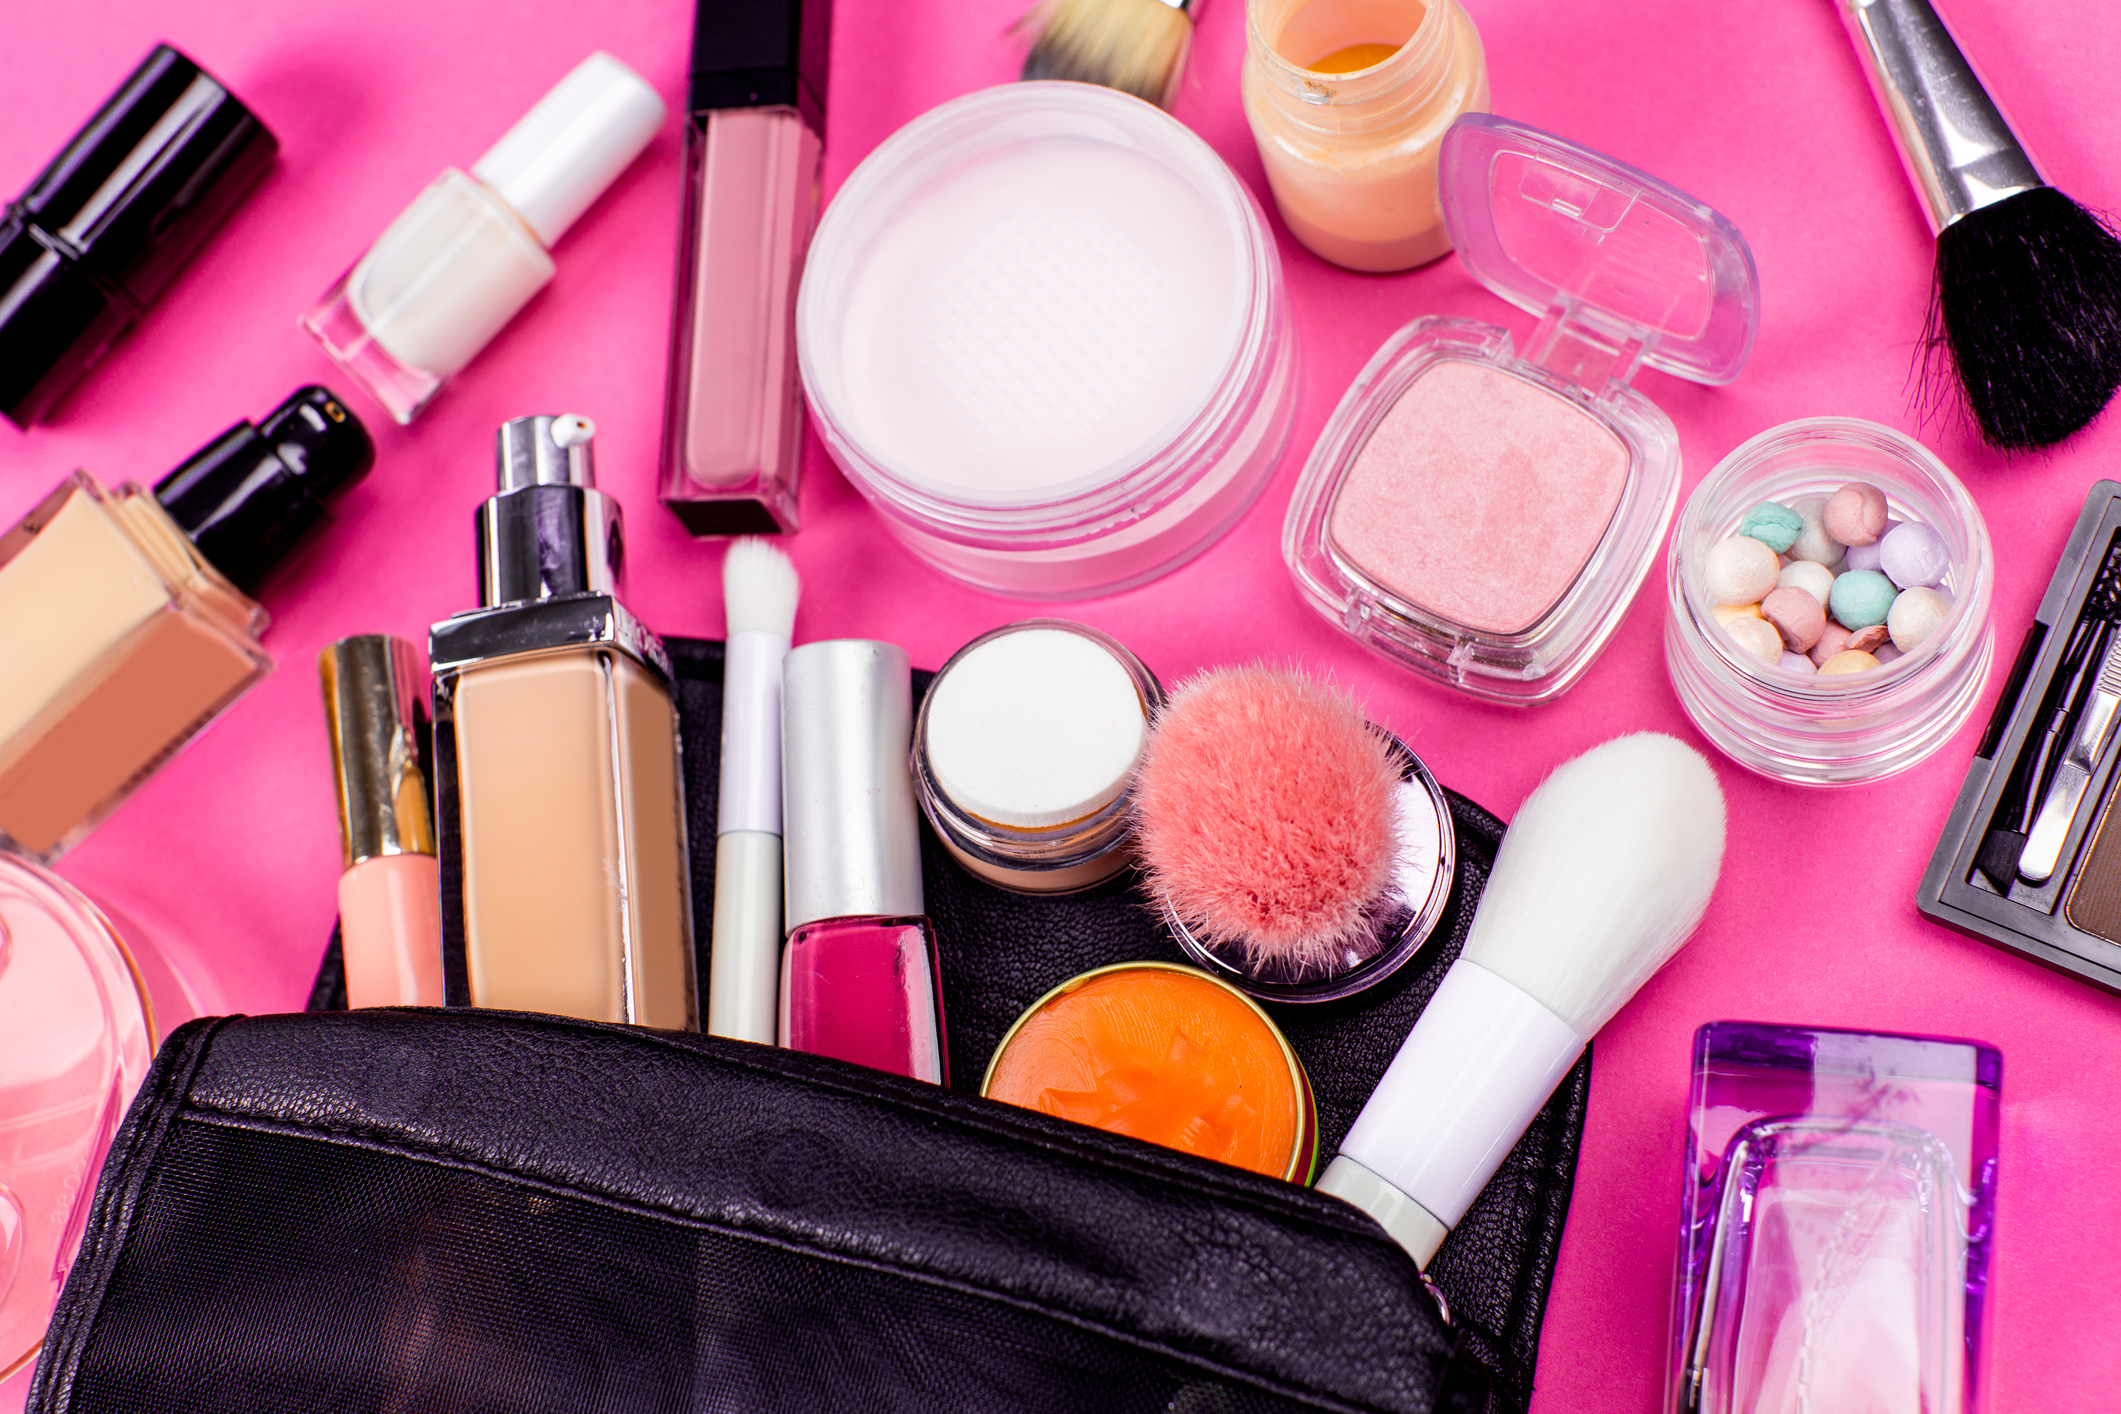 Set of colourful cosmetics on pink table (Thinkstock/PA)